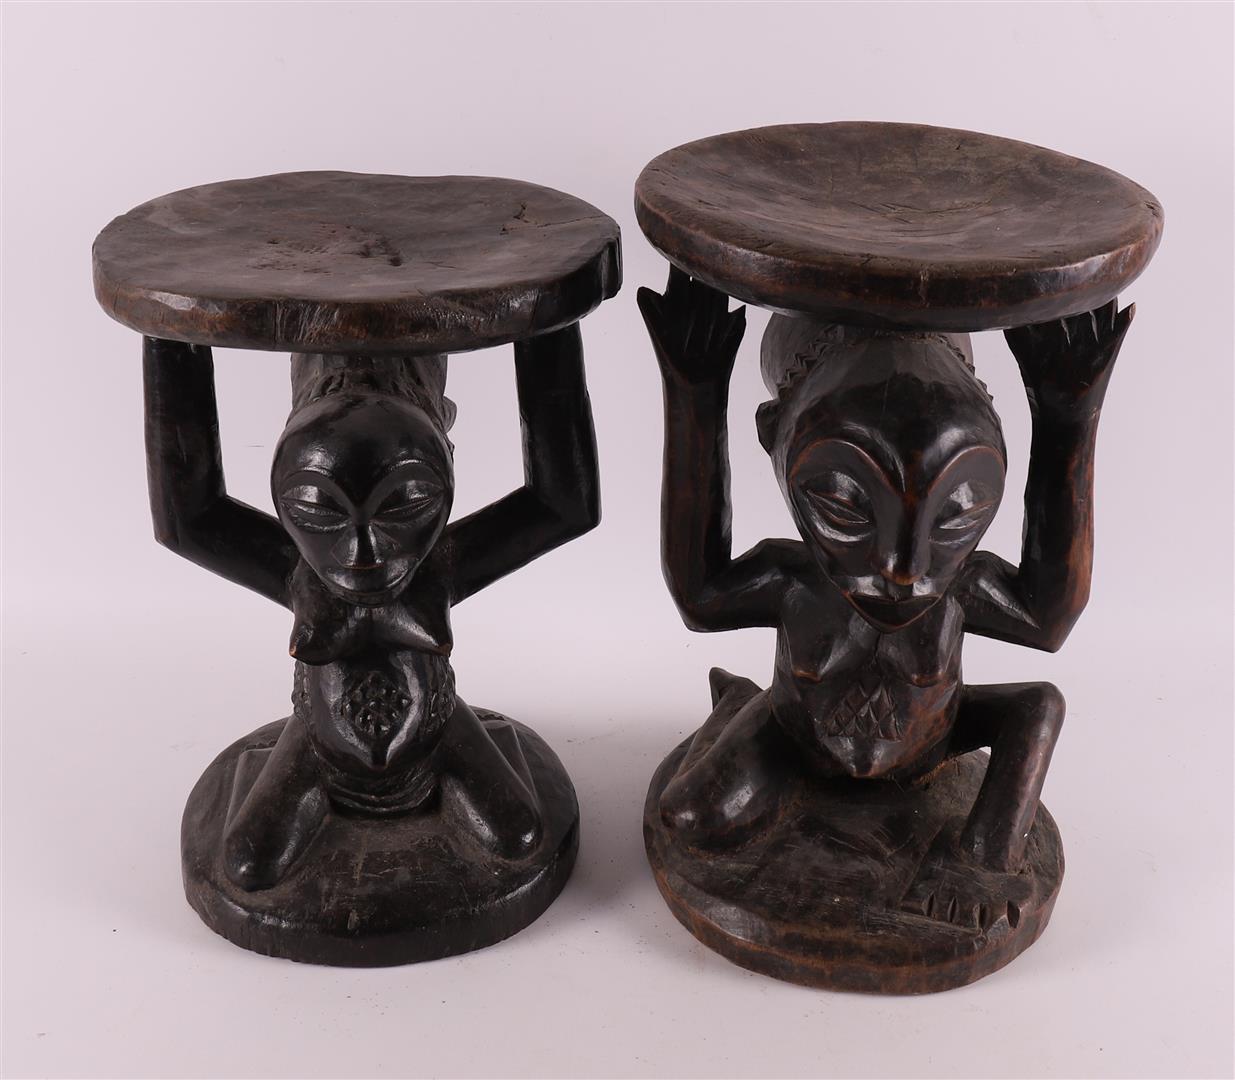 Two carved wooden stools, Luba, Congo, Central Africa, 20th century - Image 2 of 5